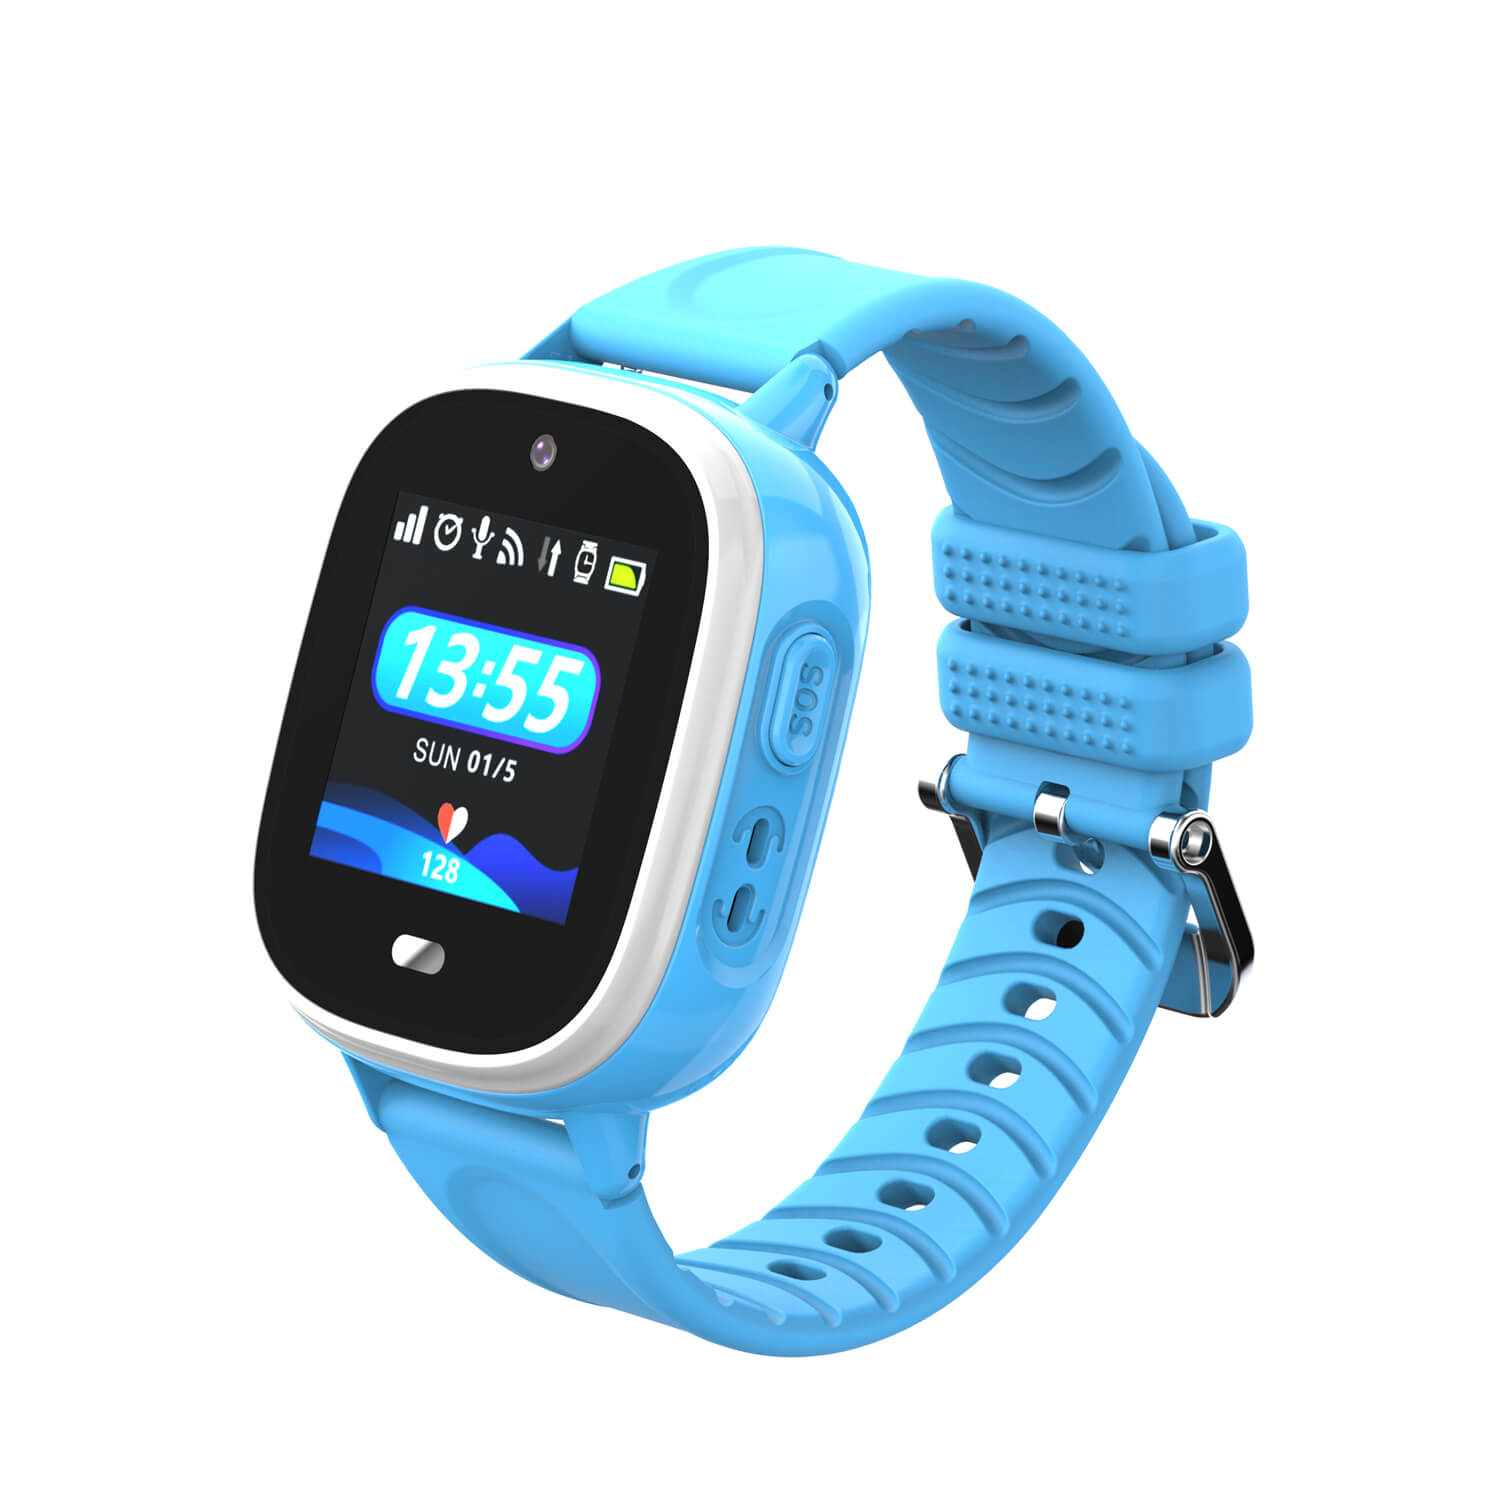 China Factory IP67 Waterproof GSM Kids Watch Hidden Child SOS Personal Mini GPS Tracker with Long Battery Life for Take off Alerts D15W